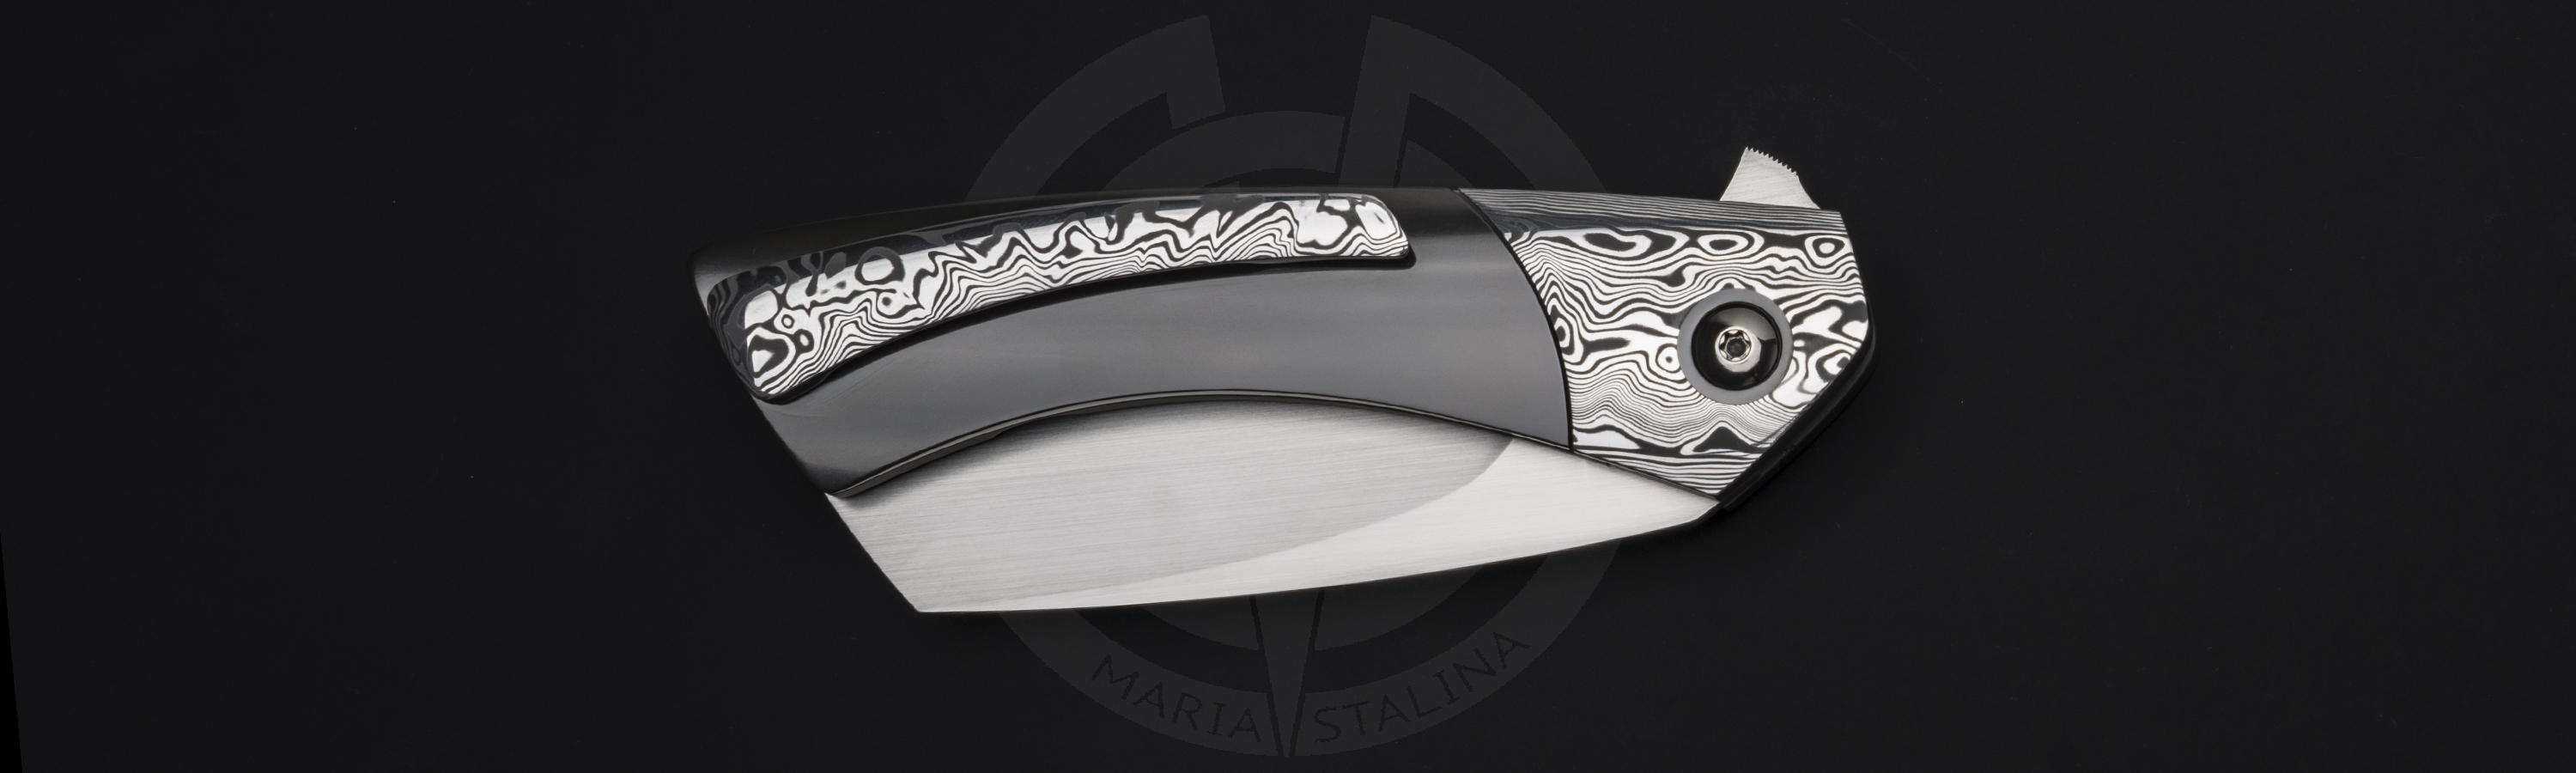 Damask steel clip and bolster